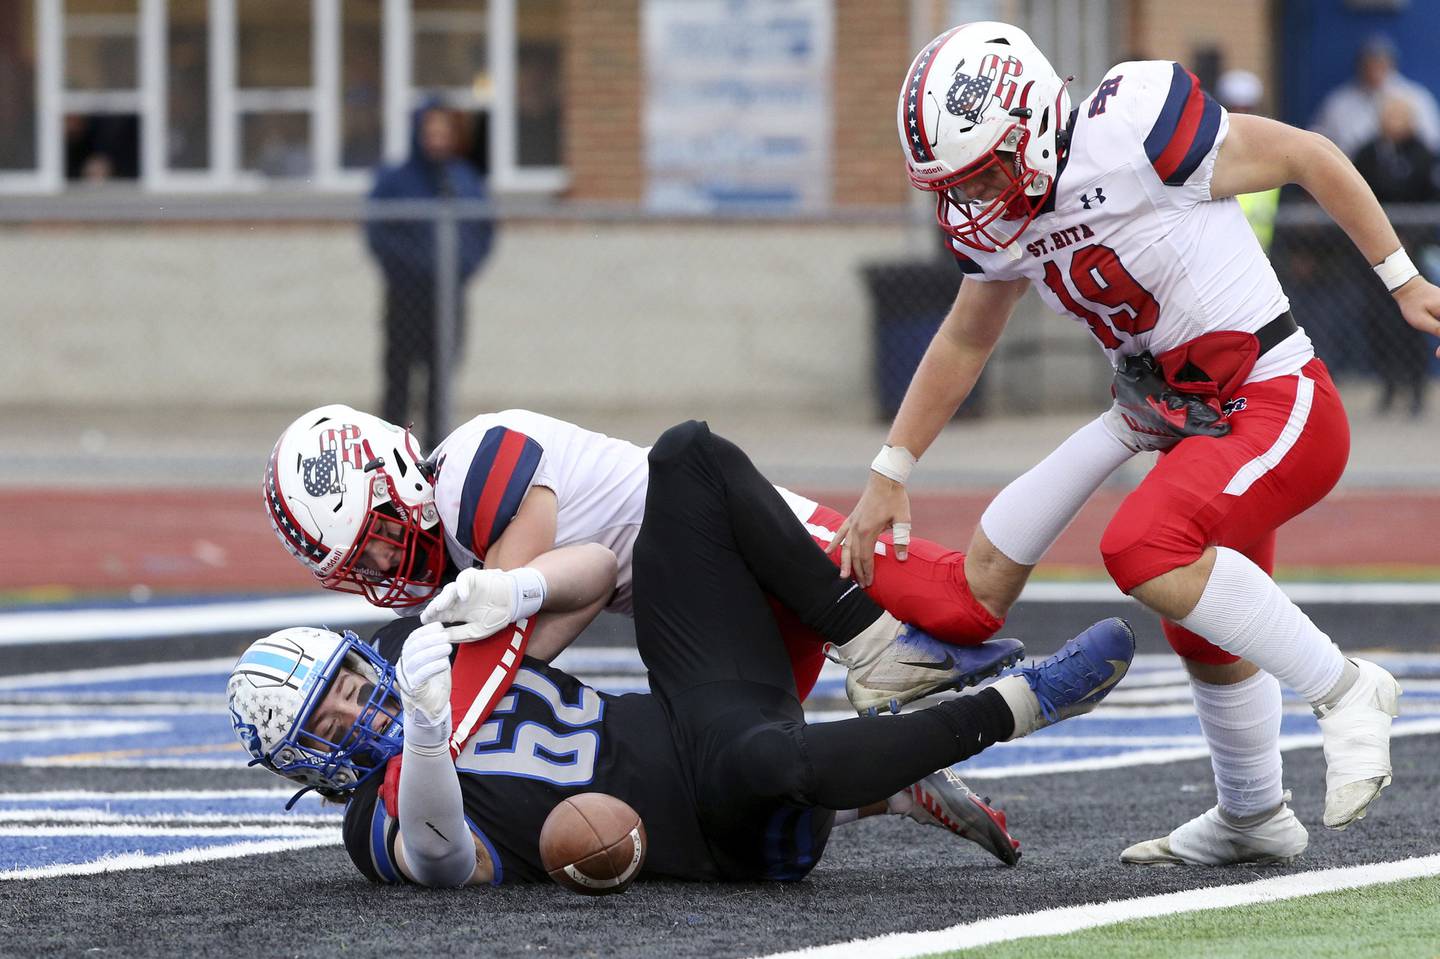 St. Rita's Noah Gertonson (19) jumps on the ball for a touchdown while teammate Johnny Schmidt tackles St. Charles North's Cole Schertz (62) during a Class 7A state quarterfinal game in St. Charles on Saturday, Nov. 12, 2022.